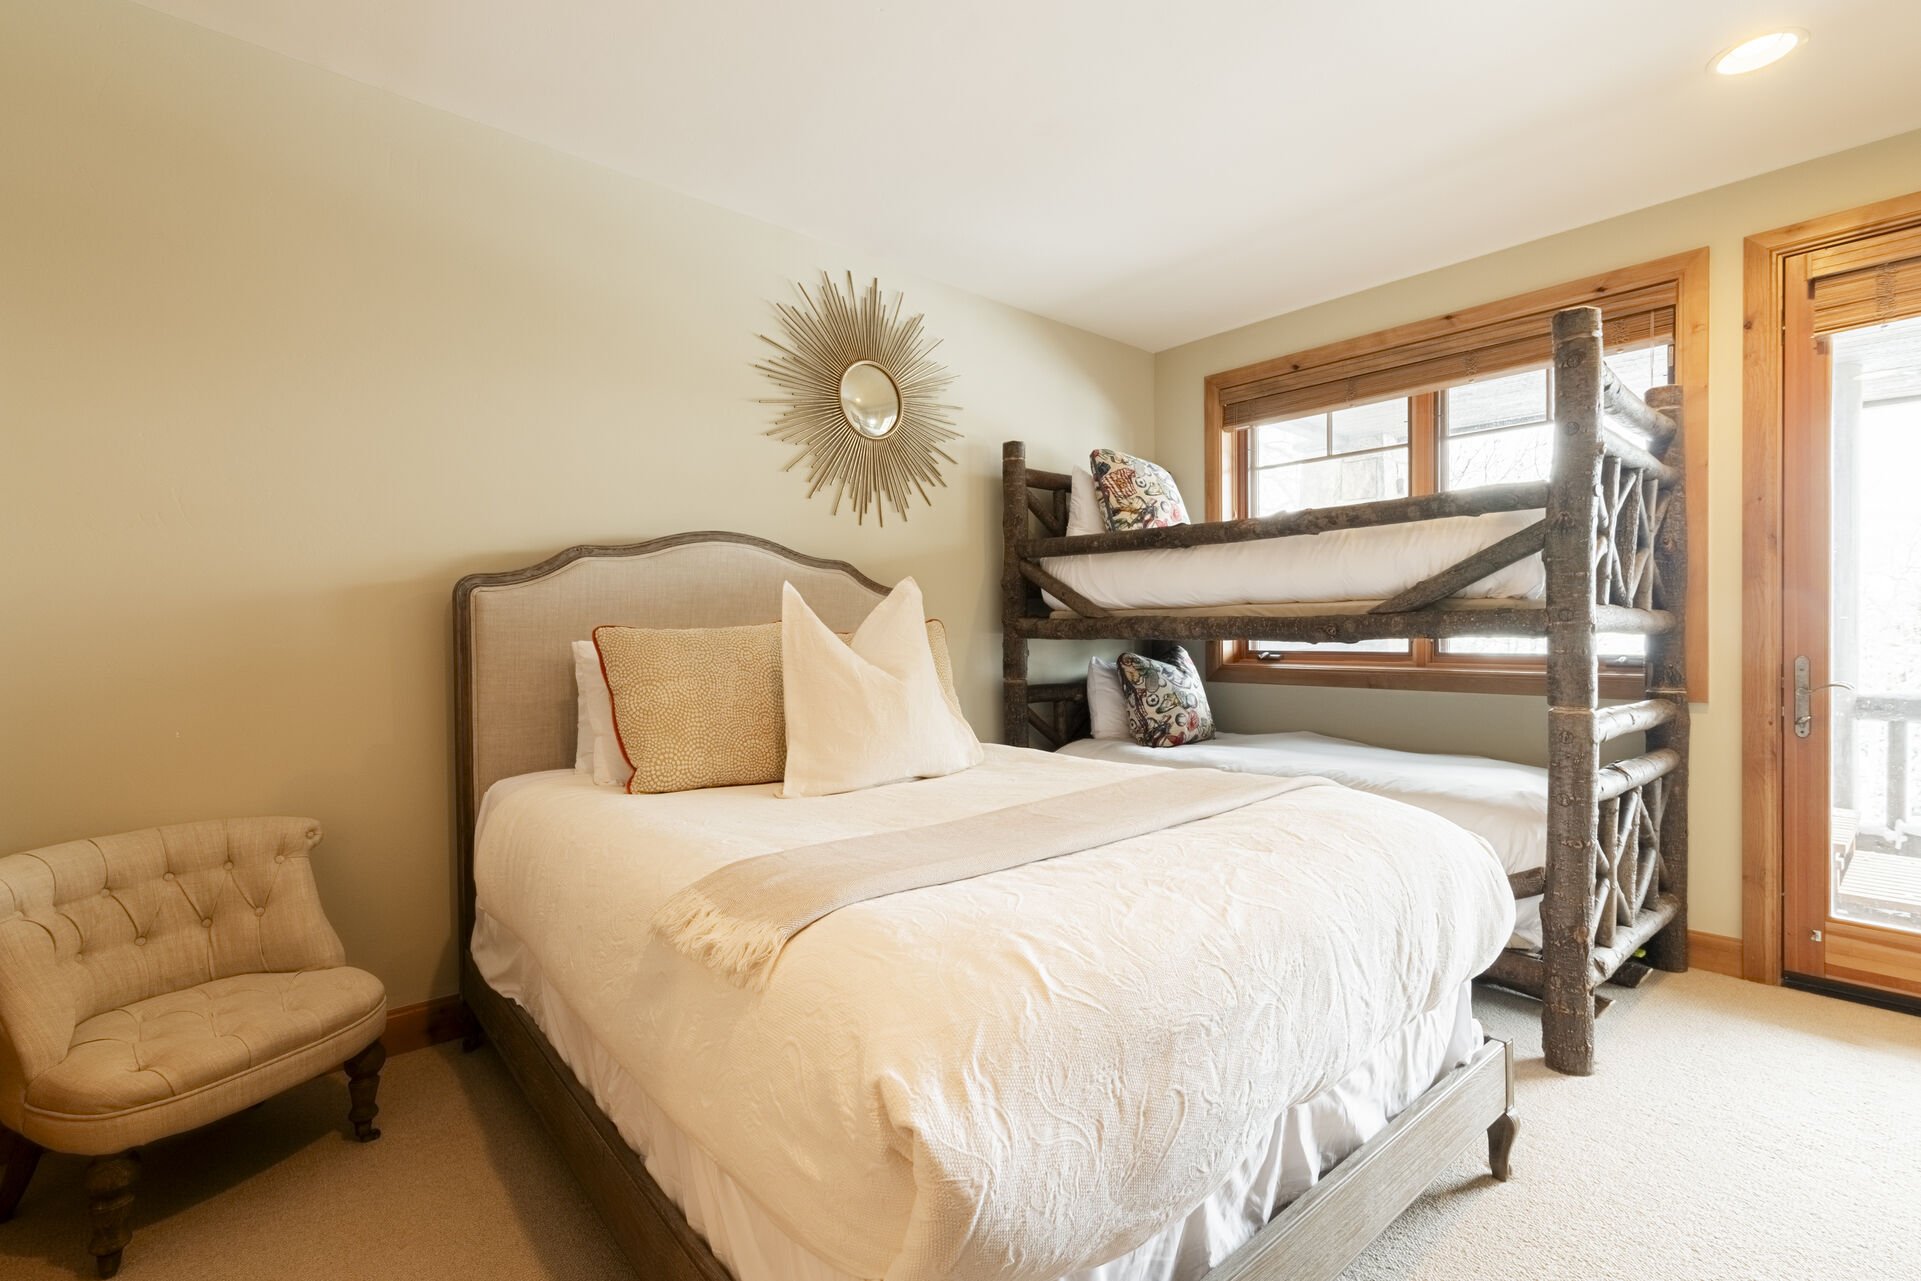 Bedroom 4 (1st Level) offers a queen bed and twin over twin bunk beds